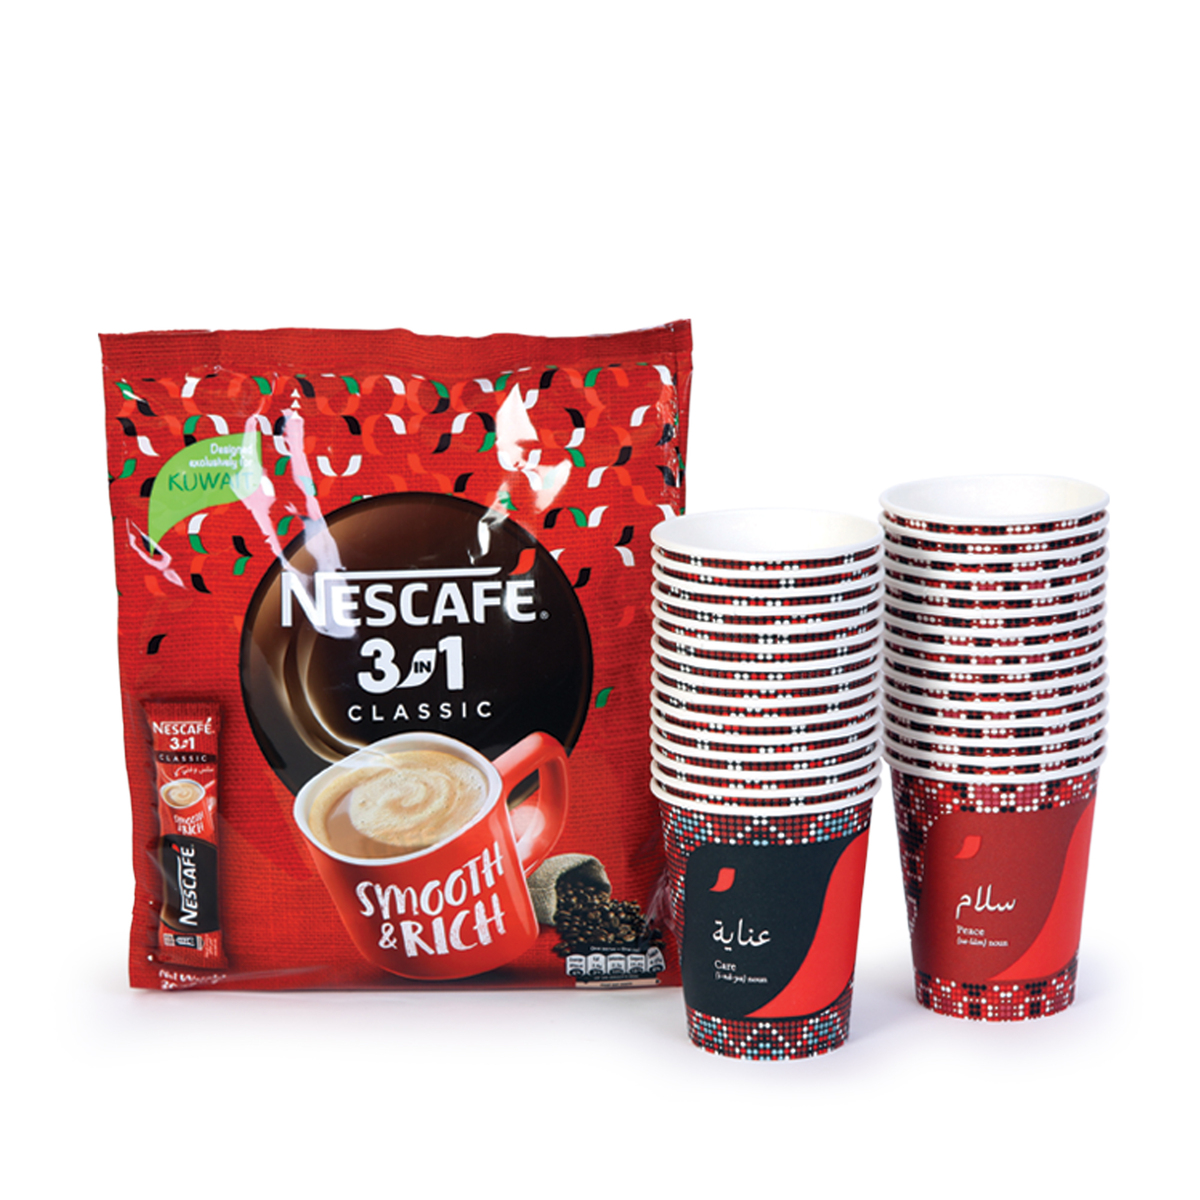 Nescafe Classic 3in1 Instant Coffee Value Pack 30 x 20 g + Cups 30 pcs